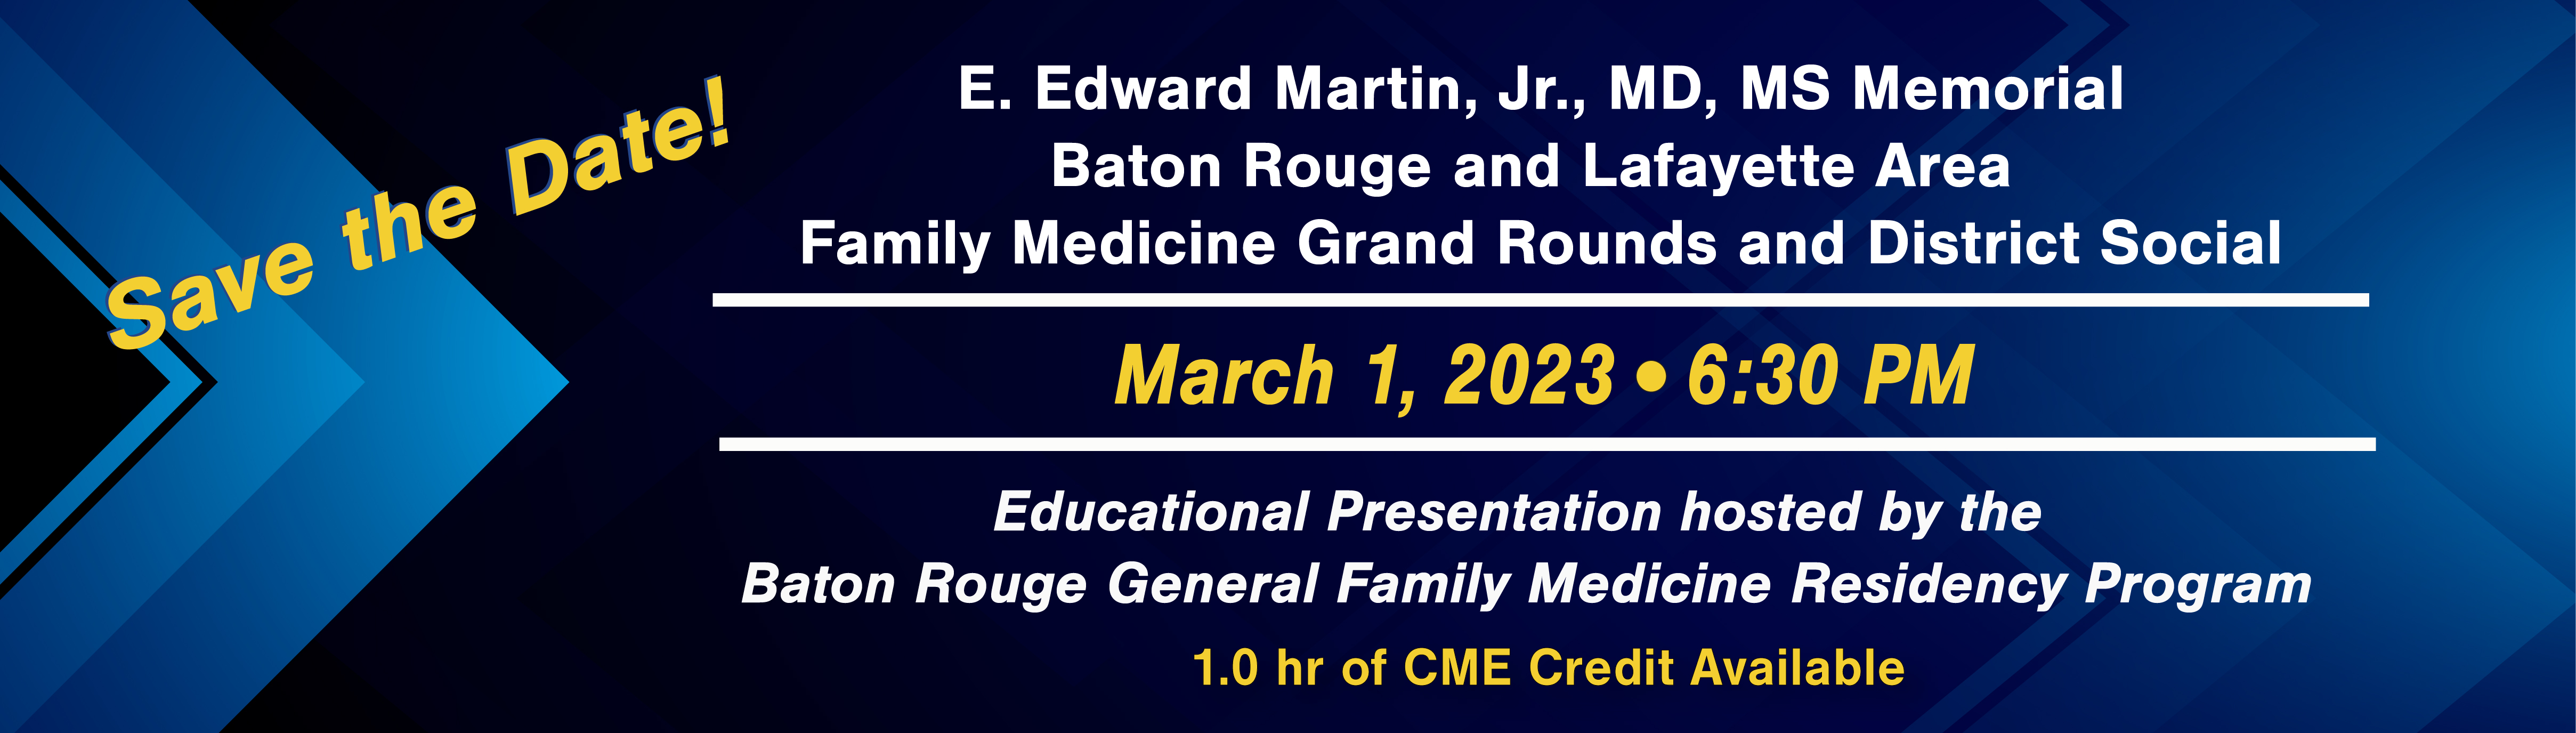 Grand Rounds web banner